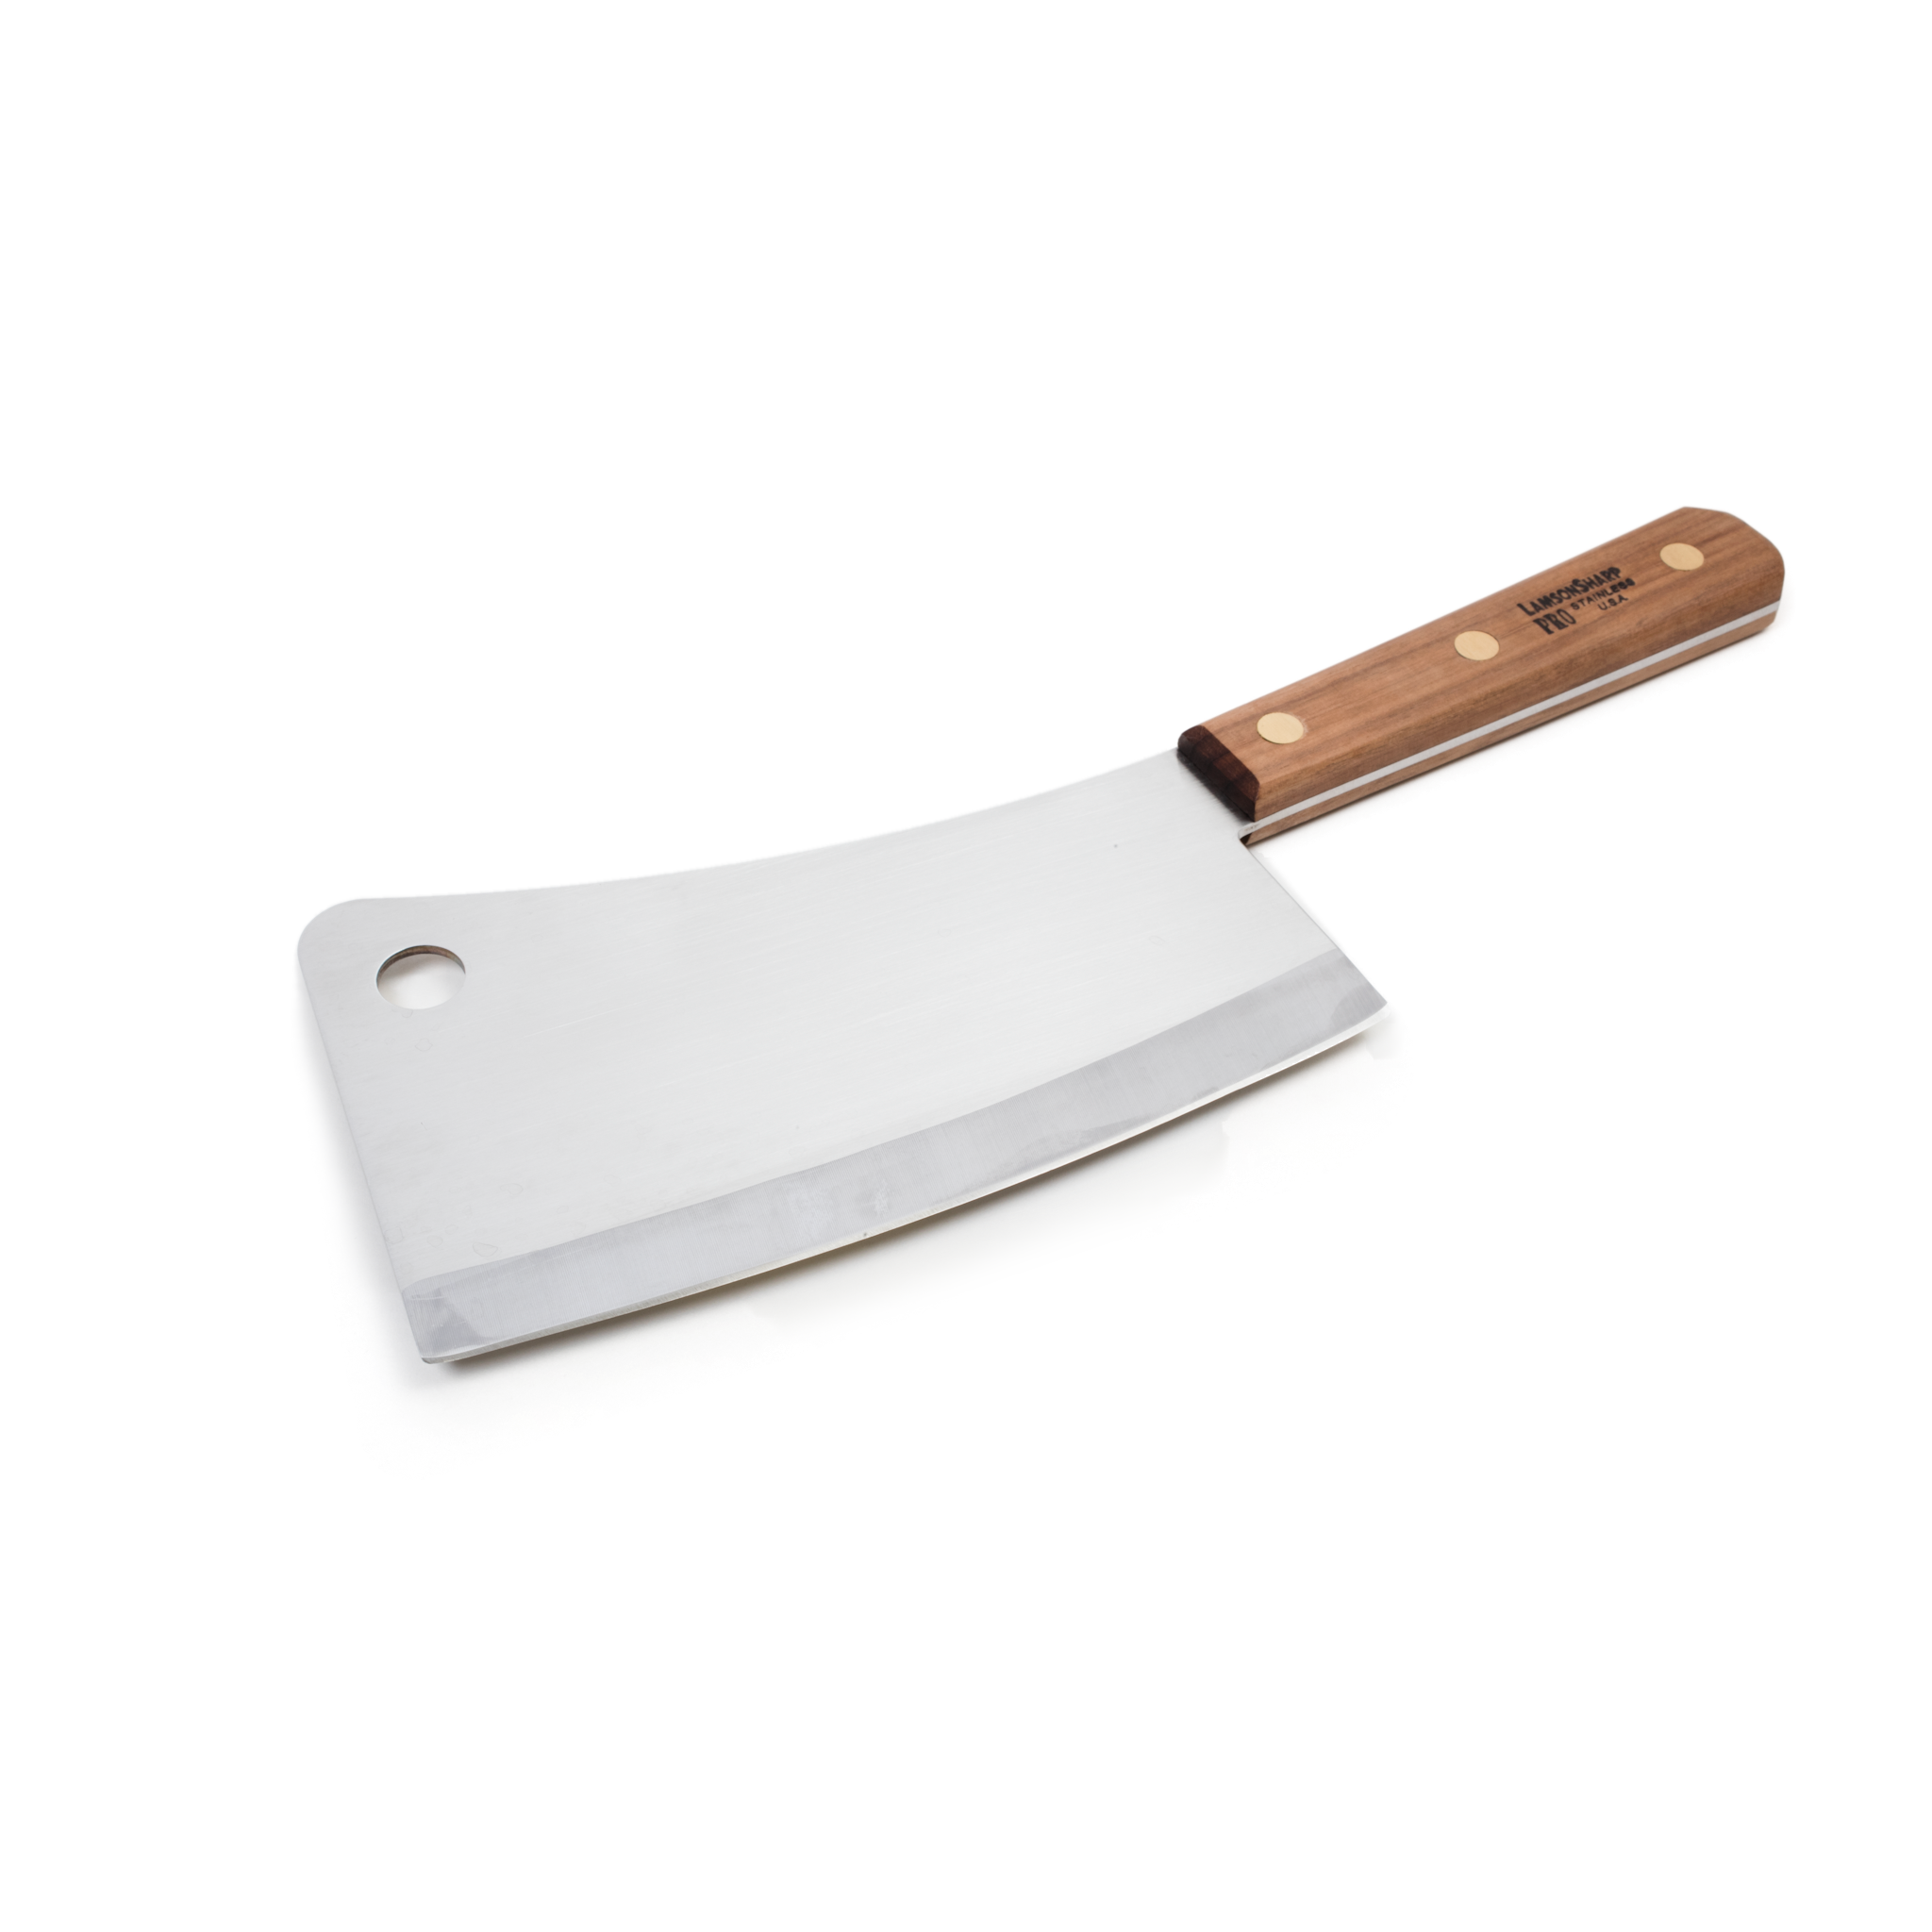 https://res.cloudinary.com/hksqkdlah/image/upload/37822_sil-cleaver-lamson-products-7in-walnut-handle-meat-cleaver-33100.png